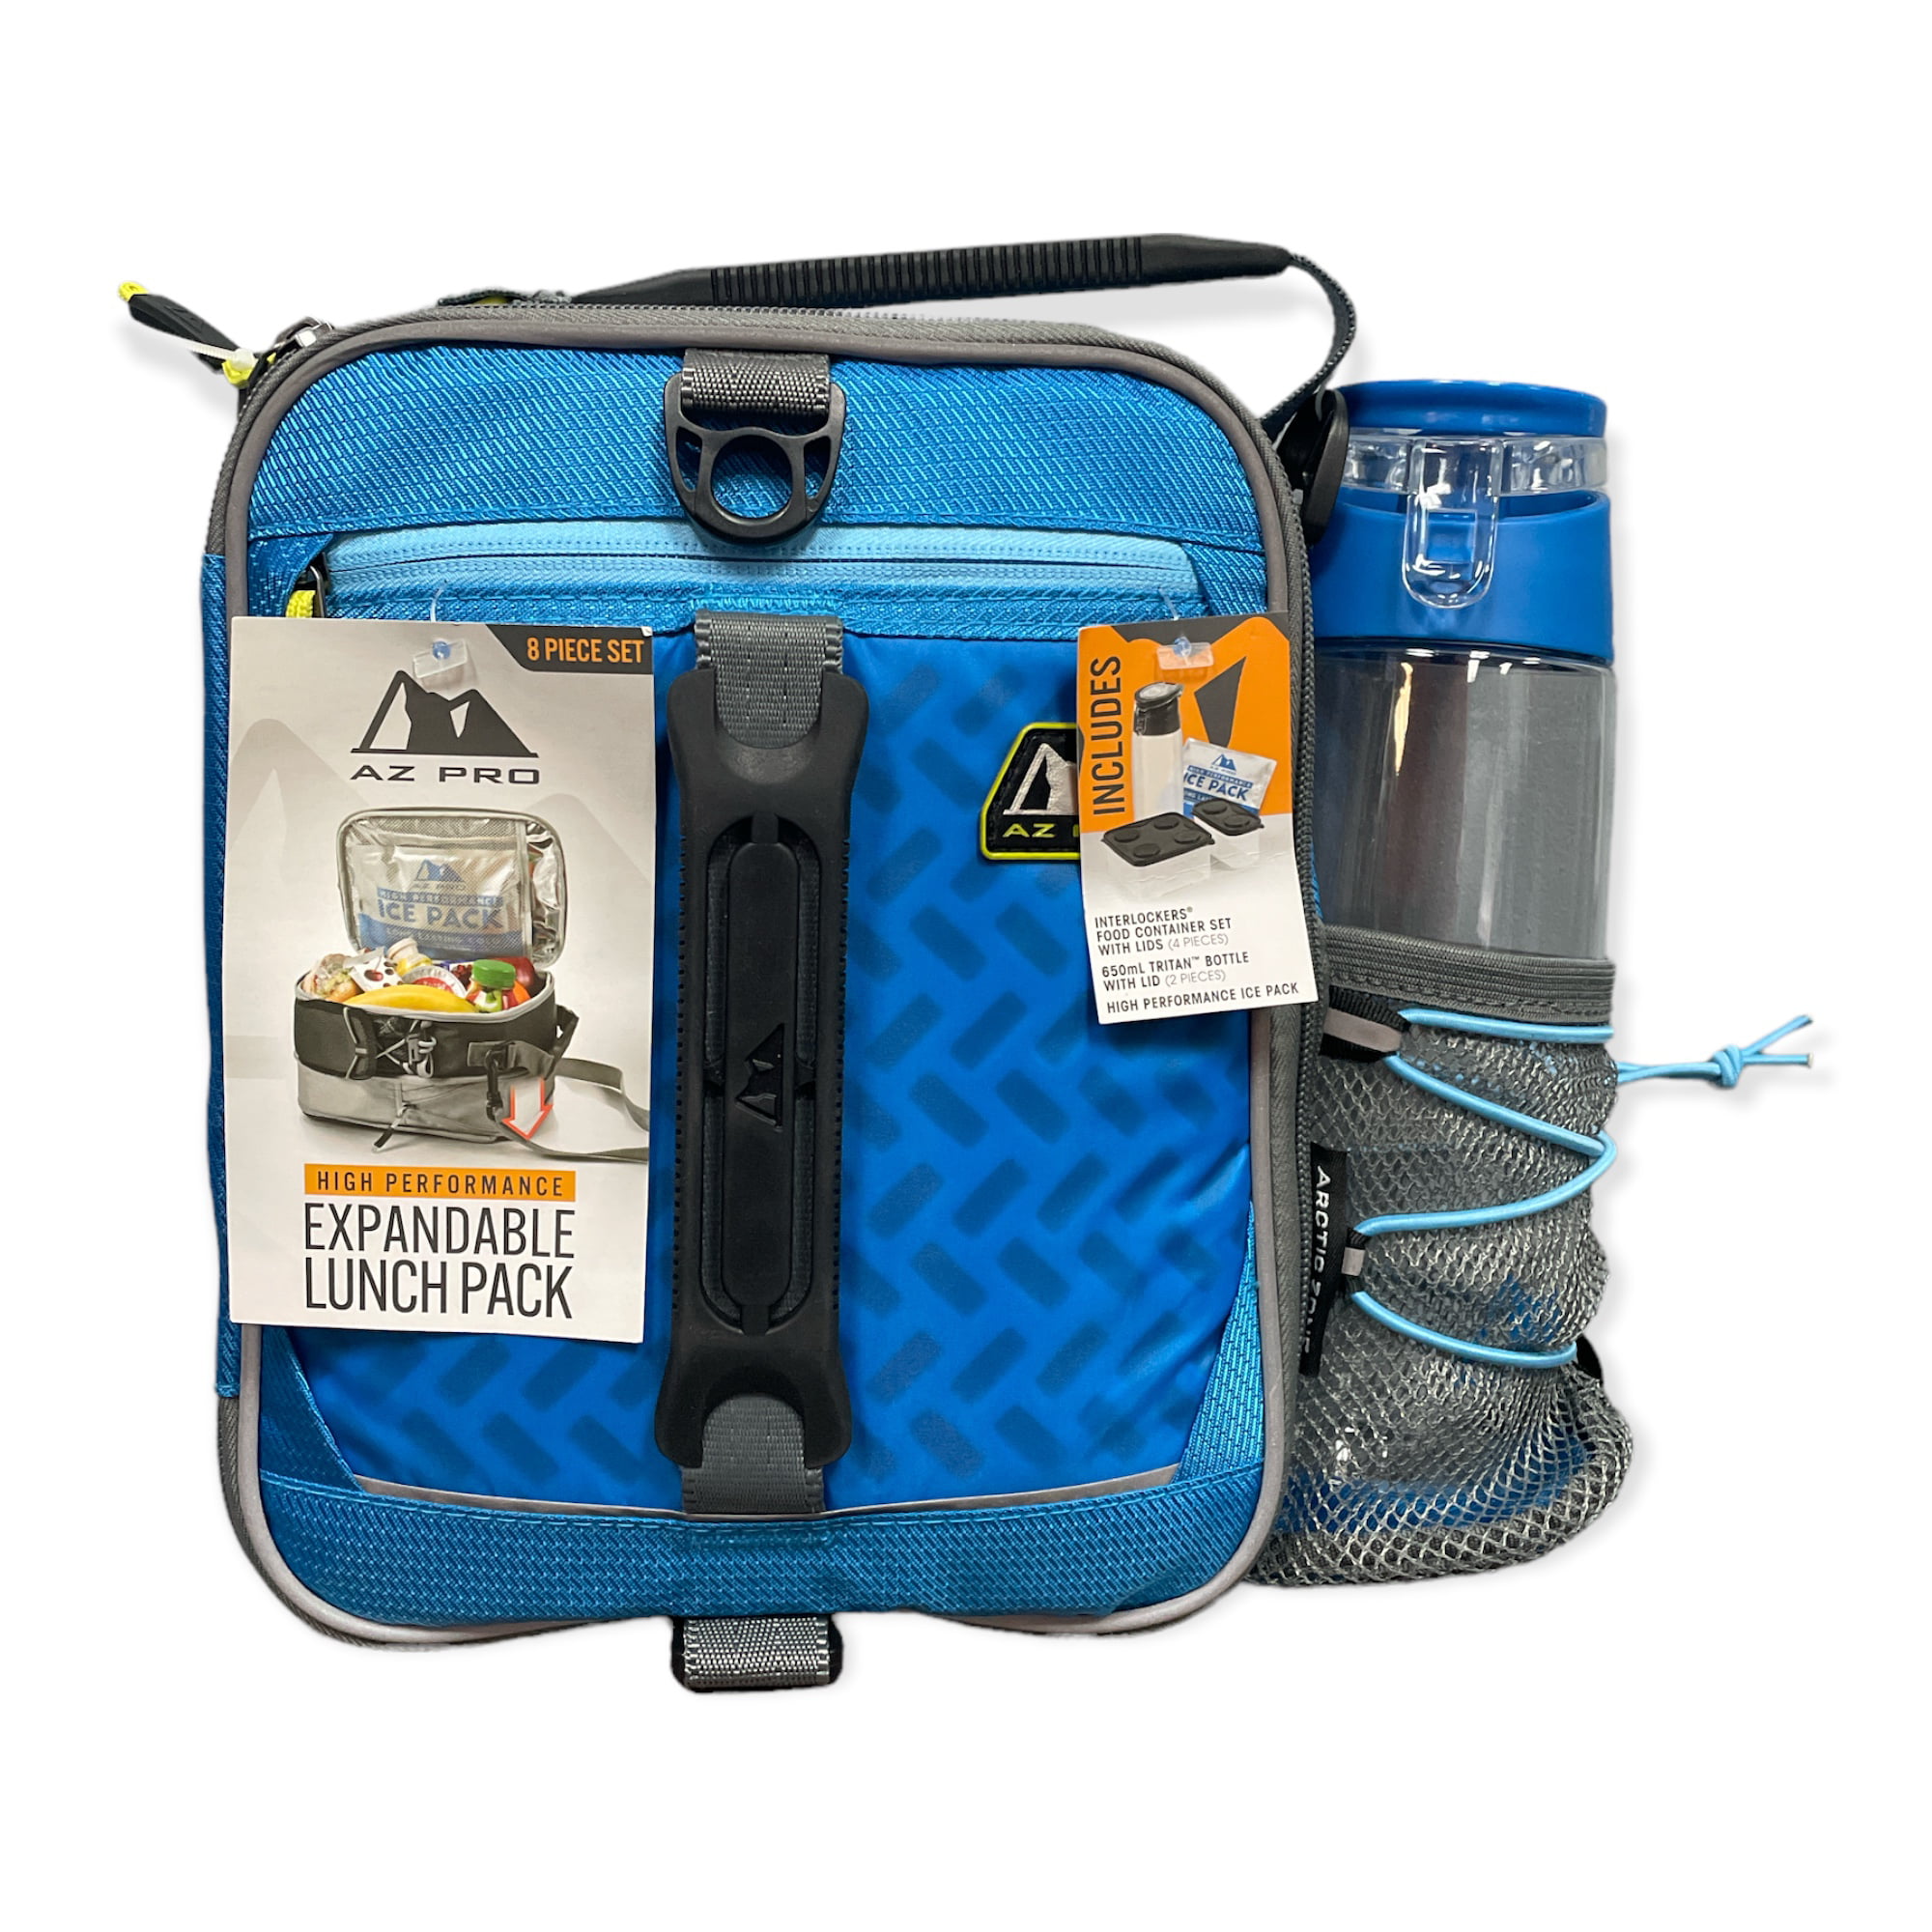 Arctic Zone Expandable Upright Lunch Pack - Insulated - Save 44%